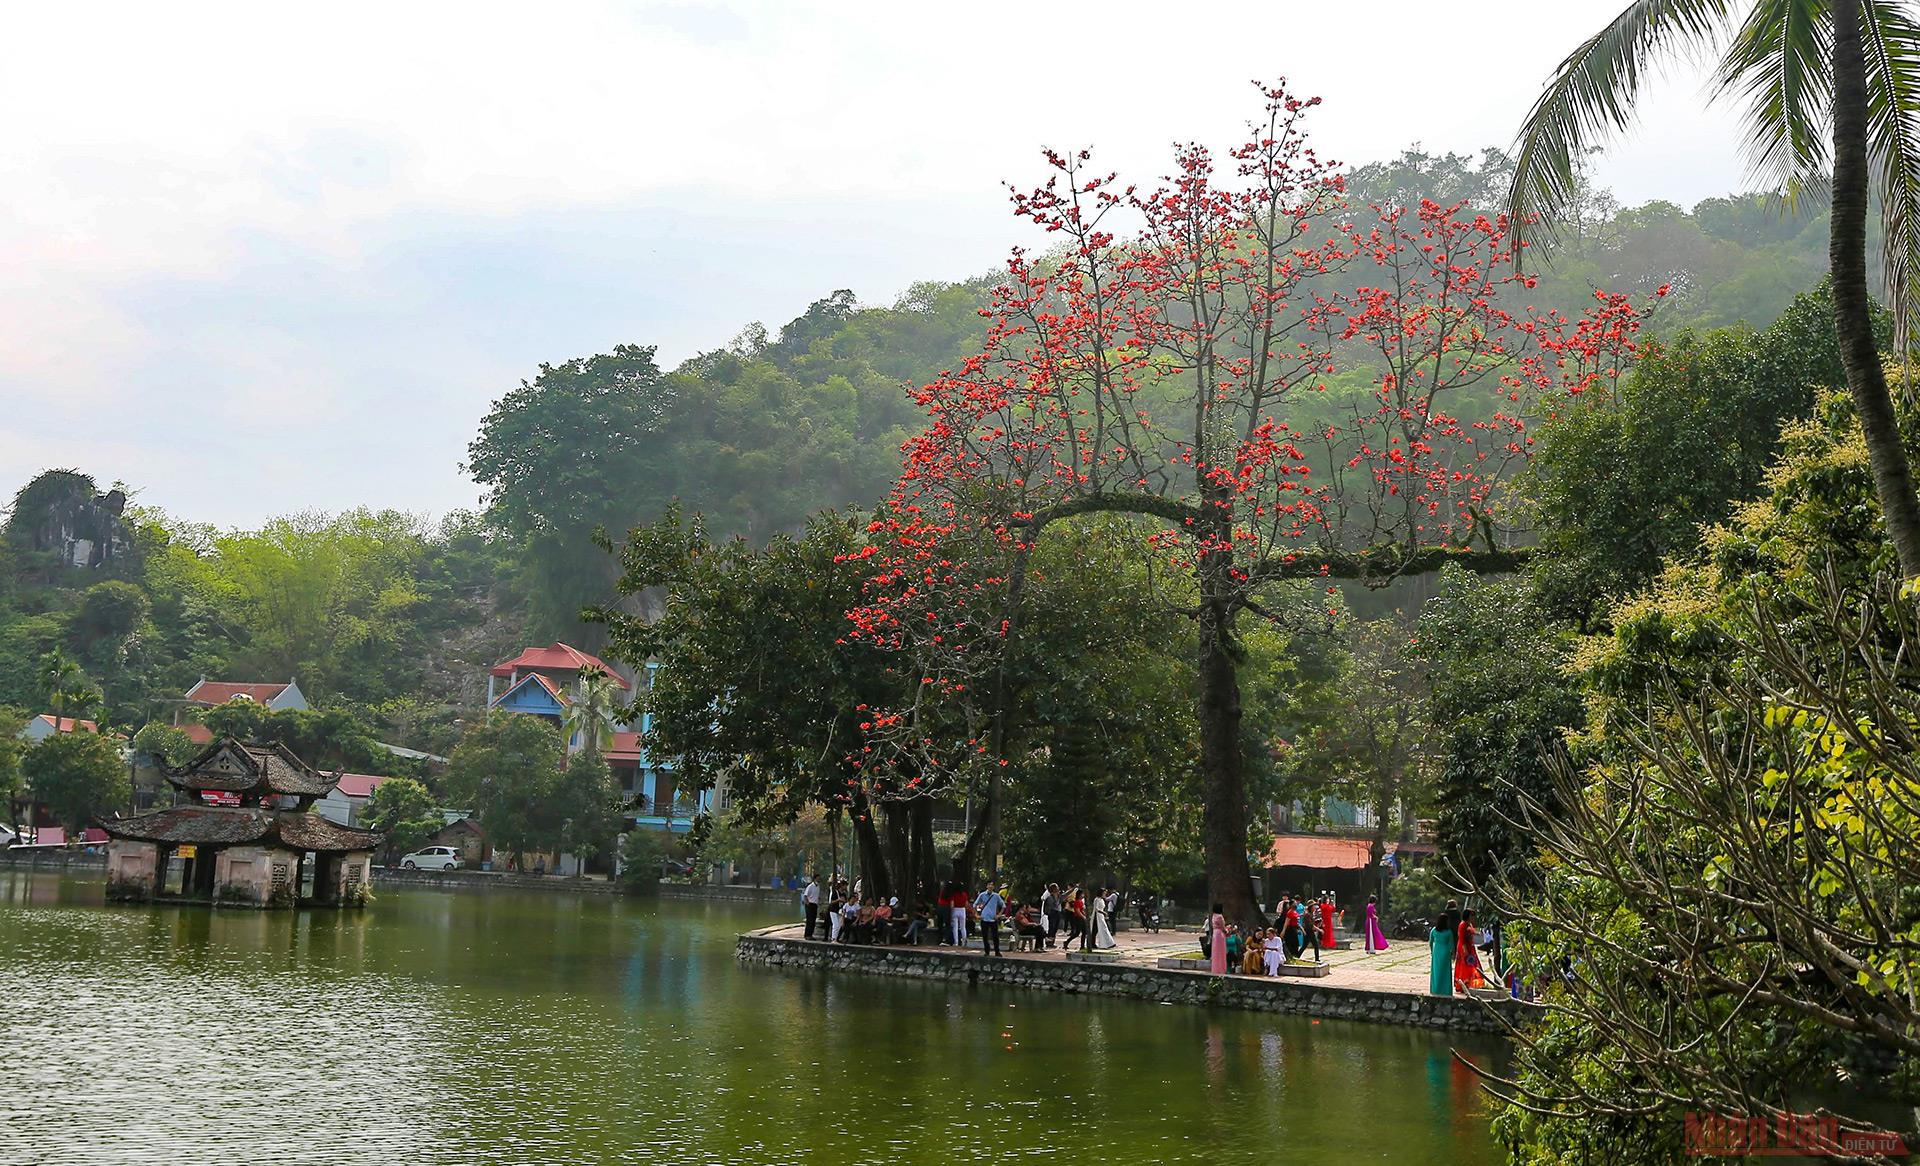 Buddhist temple brightened up with red cotton tree flowers